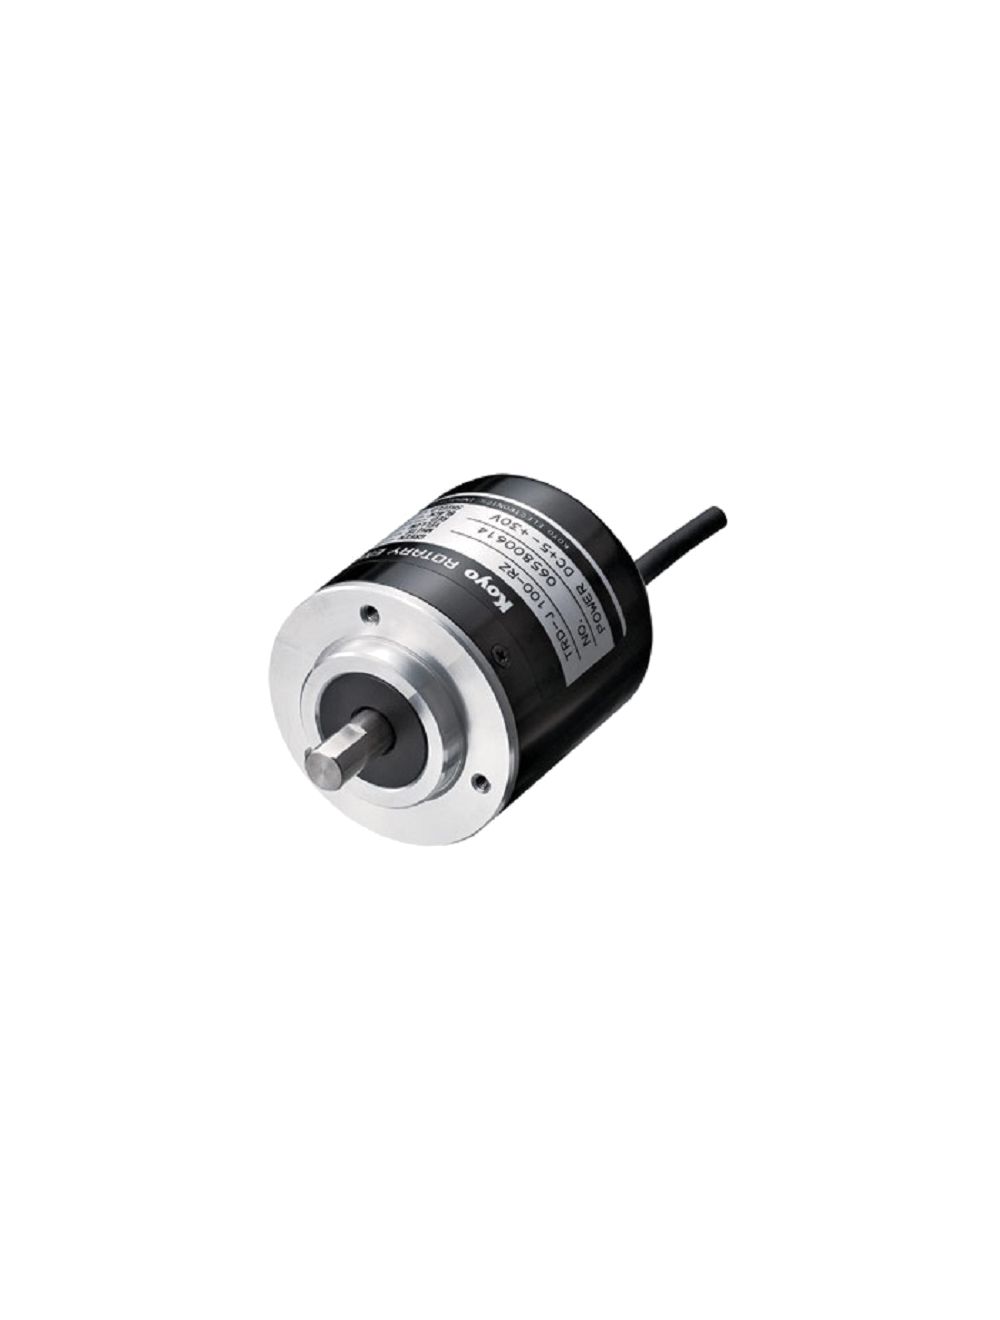 New In stock for sale, KOYO Compact Universal Incremental Rotary Encoder TRD-J1000-RZVW